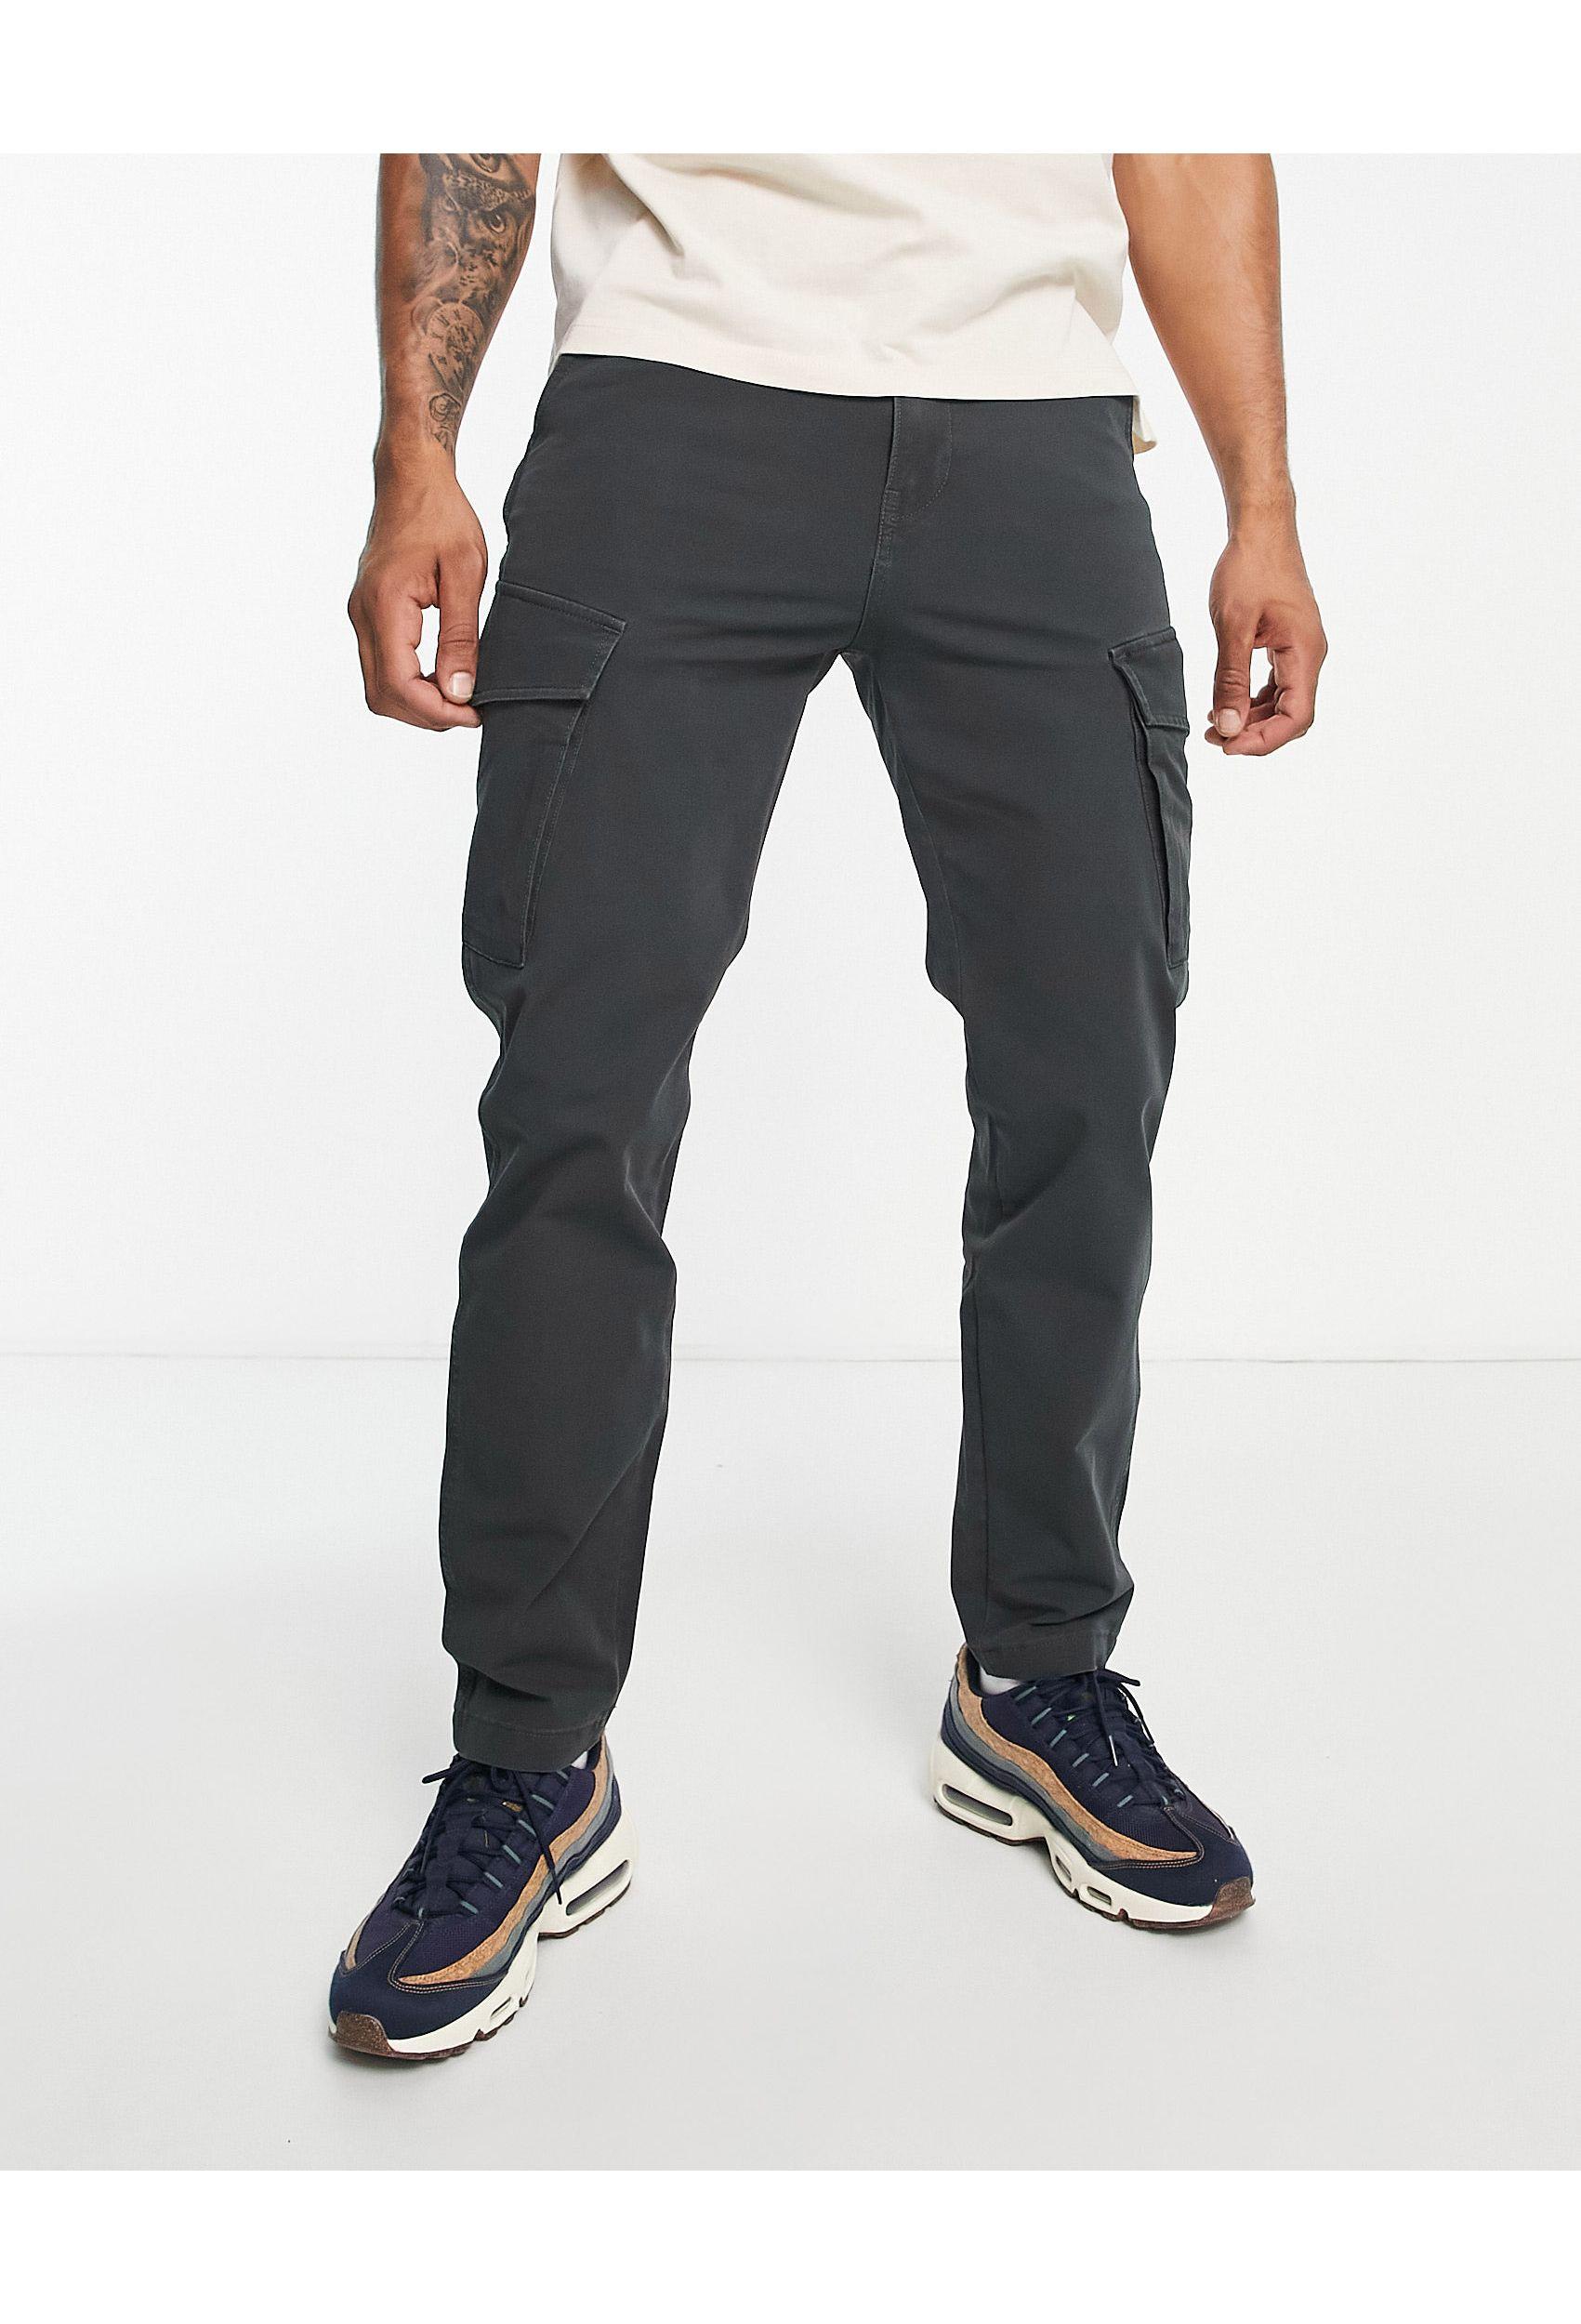 lanthaan Staat Mona Lisa Levi's Xx Slim Taper Cargo Pants With Pockets in Blue for Men | Lyst